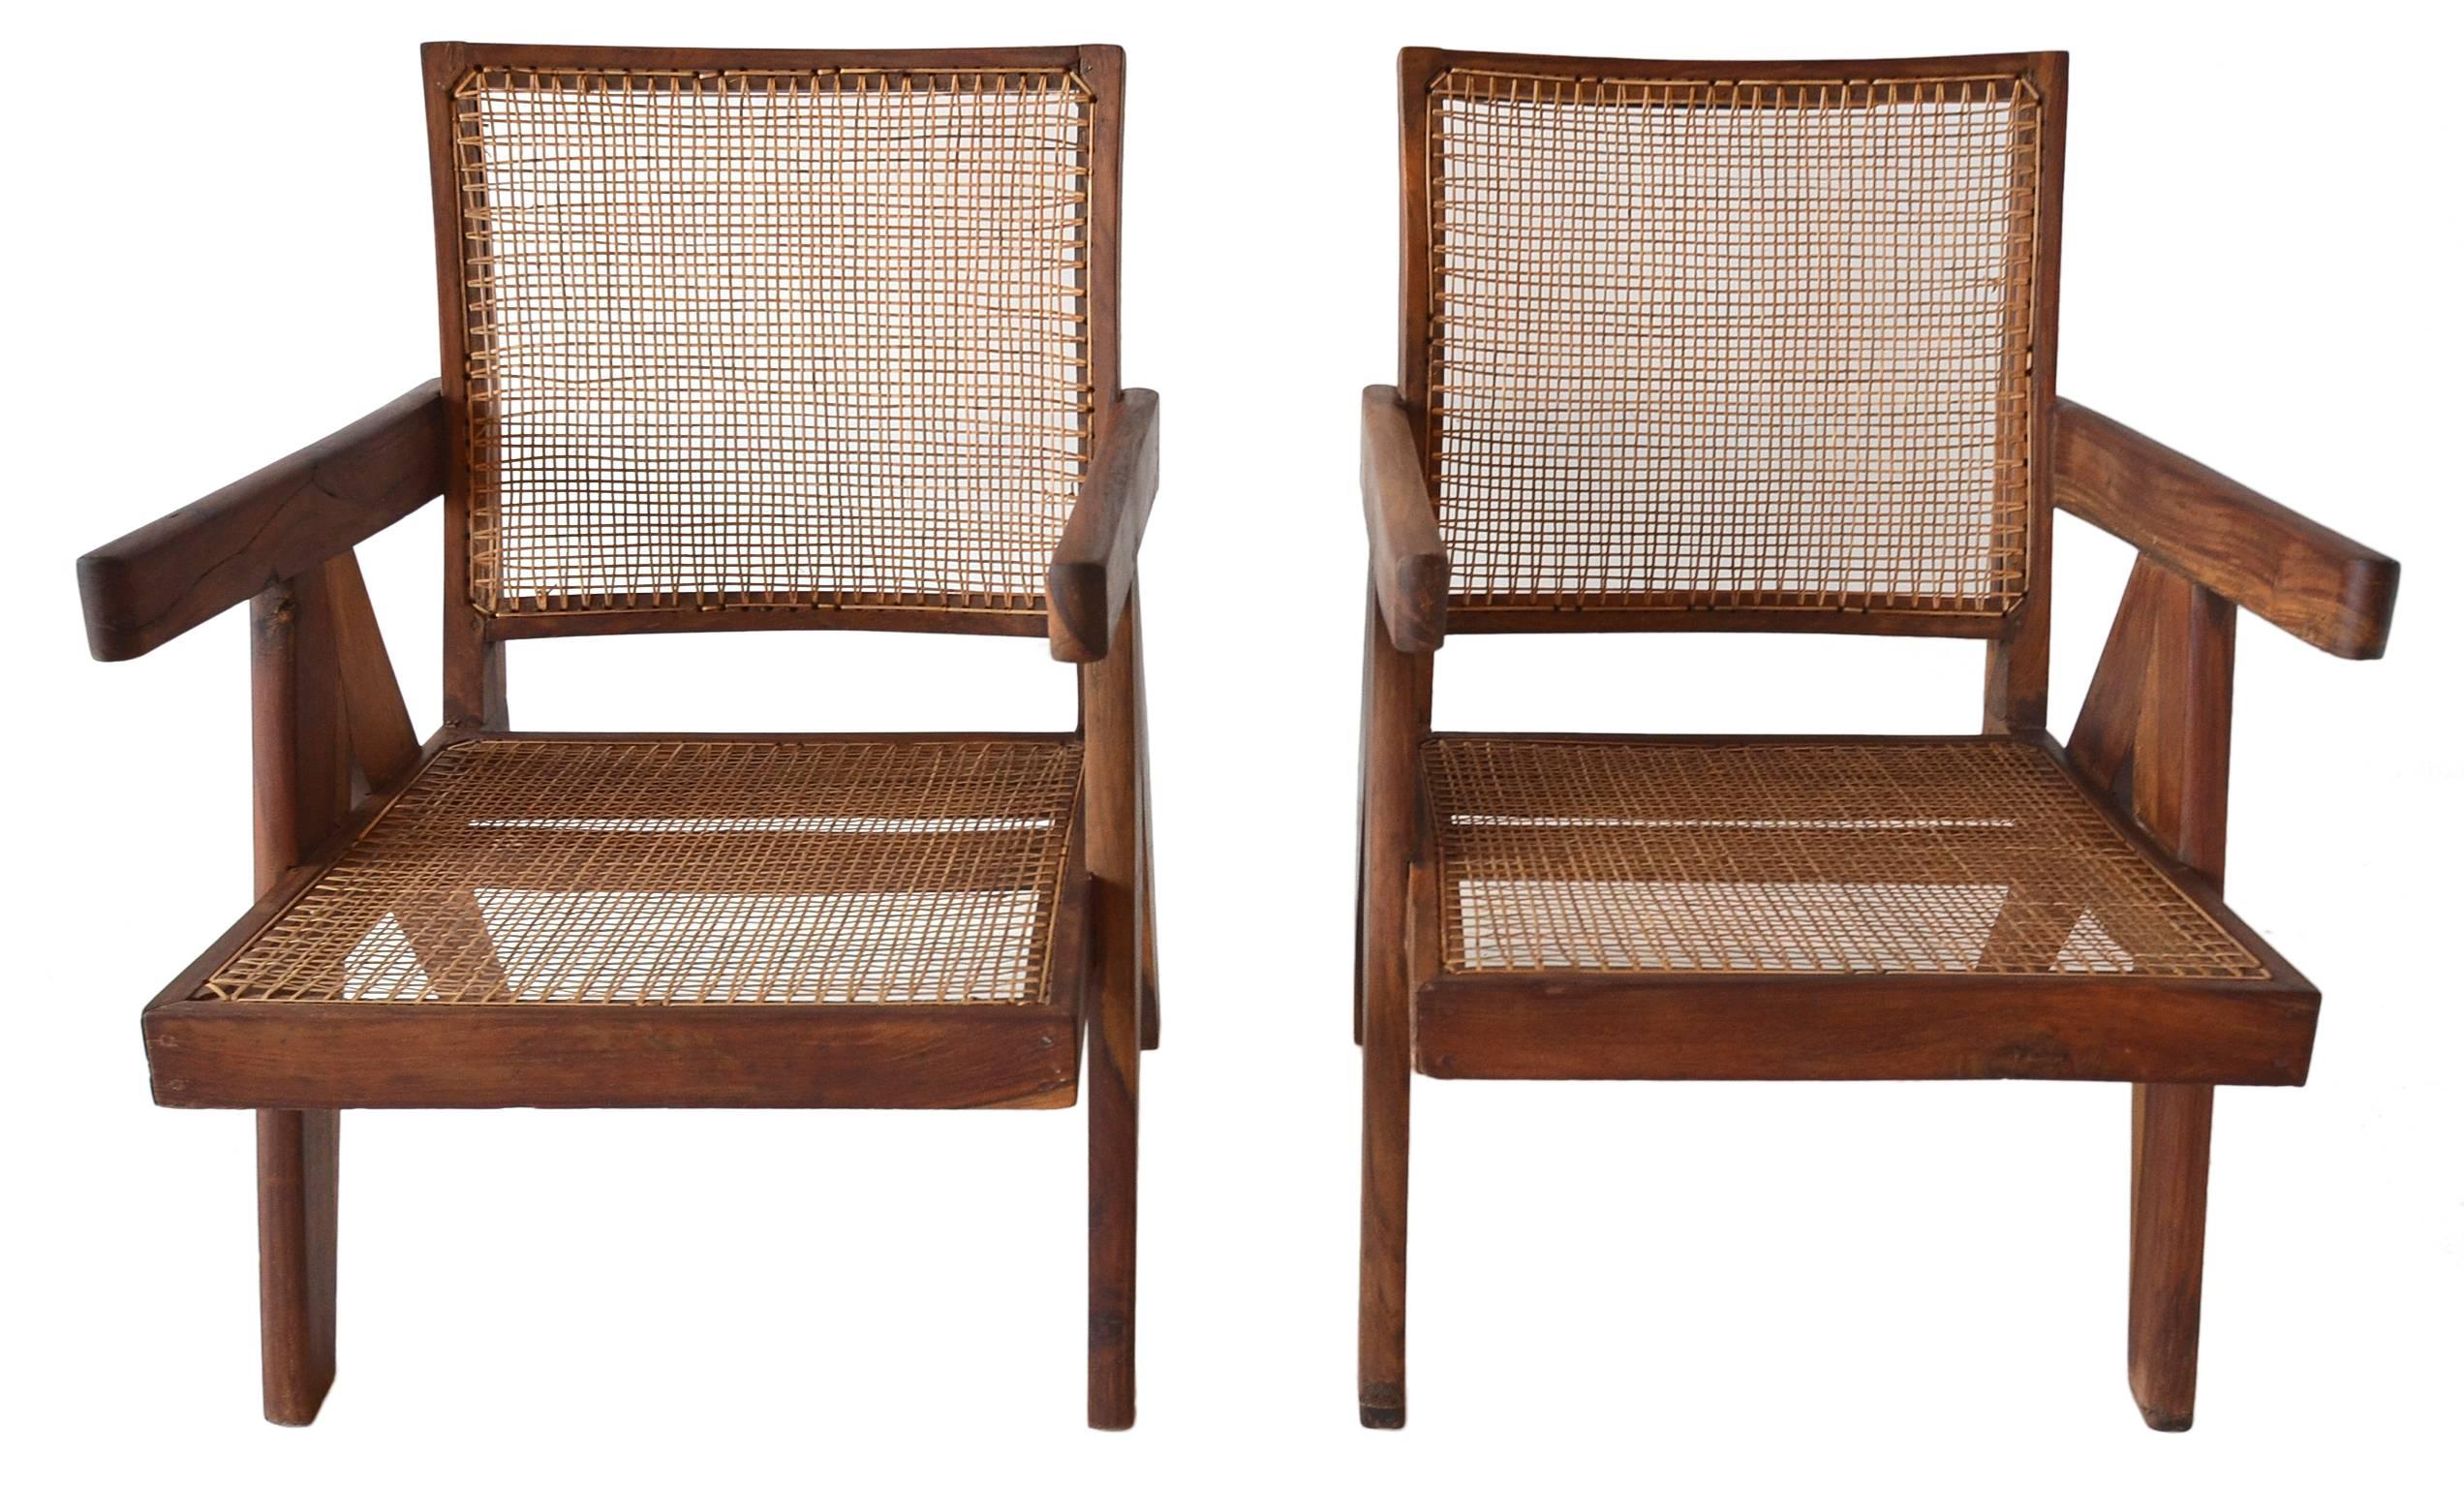 An exceptional correct pair of low lounge chairs by Pierre Jeanneret of the Chandigarh project, circa 1955.

These chairs are in exceptional condition and are created from solid Indian Rosewood. 

A fine vintage pair. Renovated sympathetically